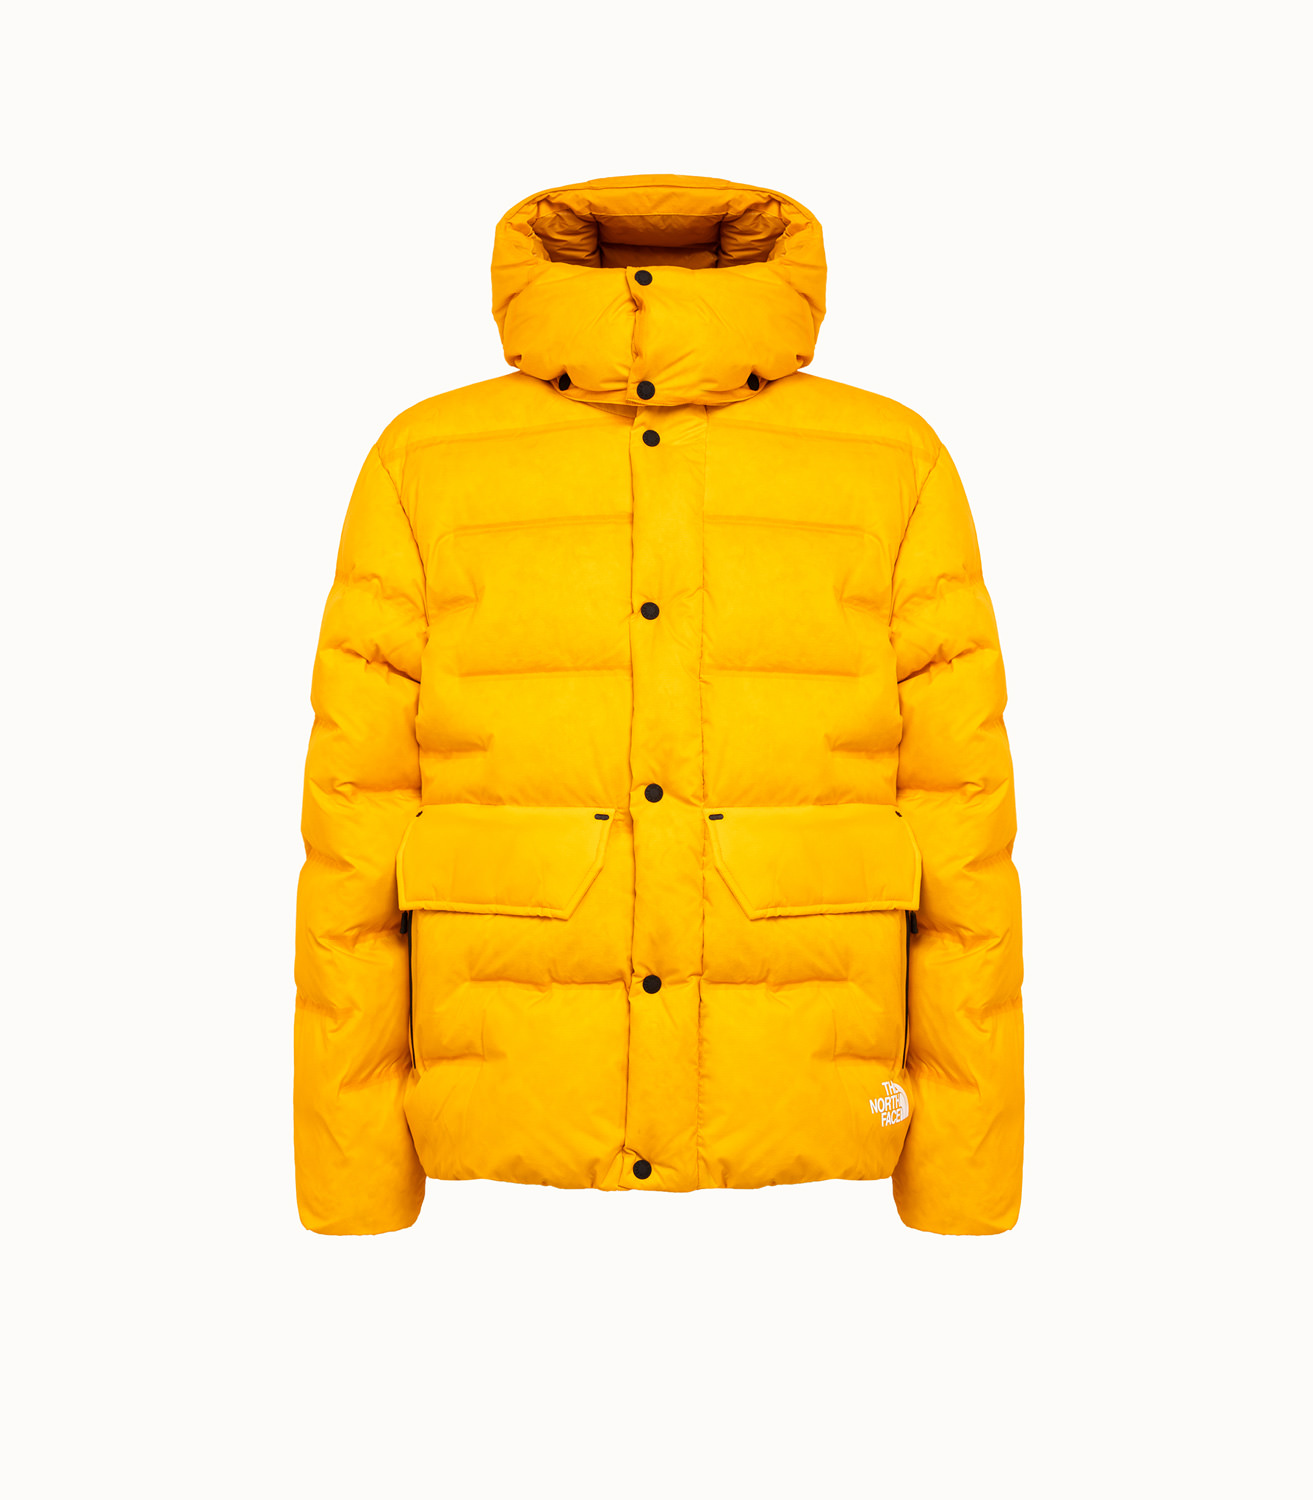 puffer jacket  North face puffer jacket, North face jacket outfit